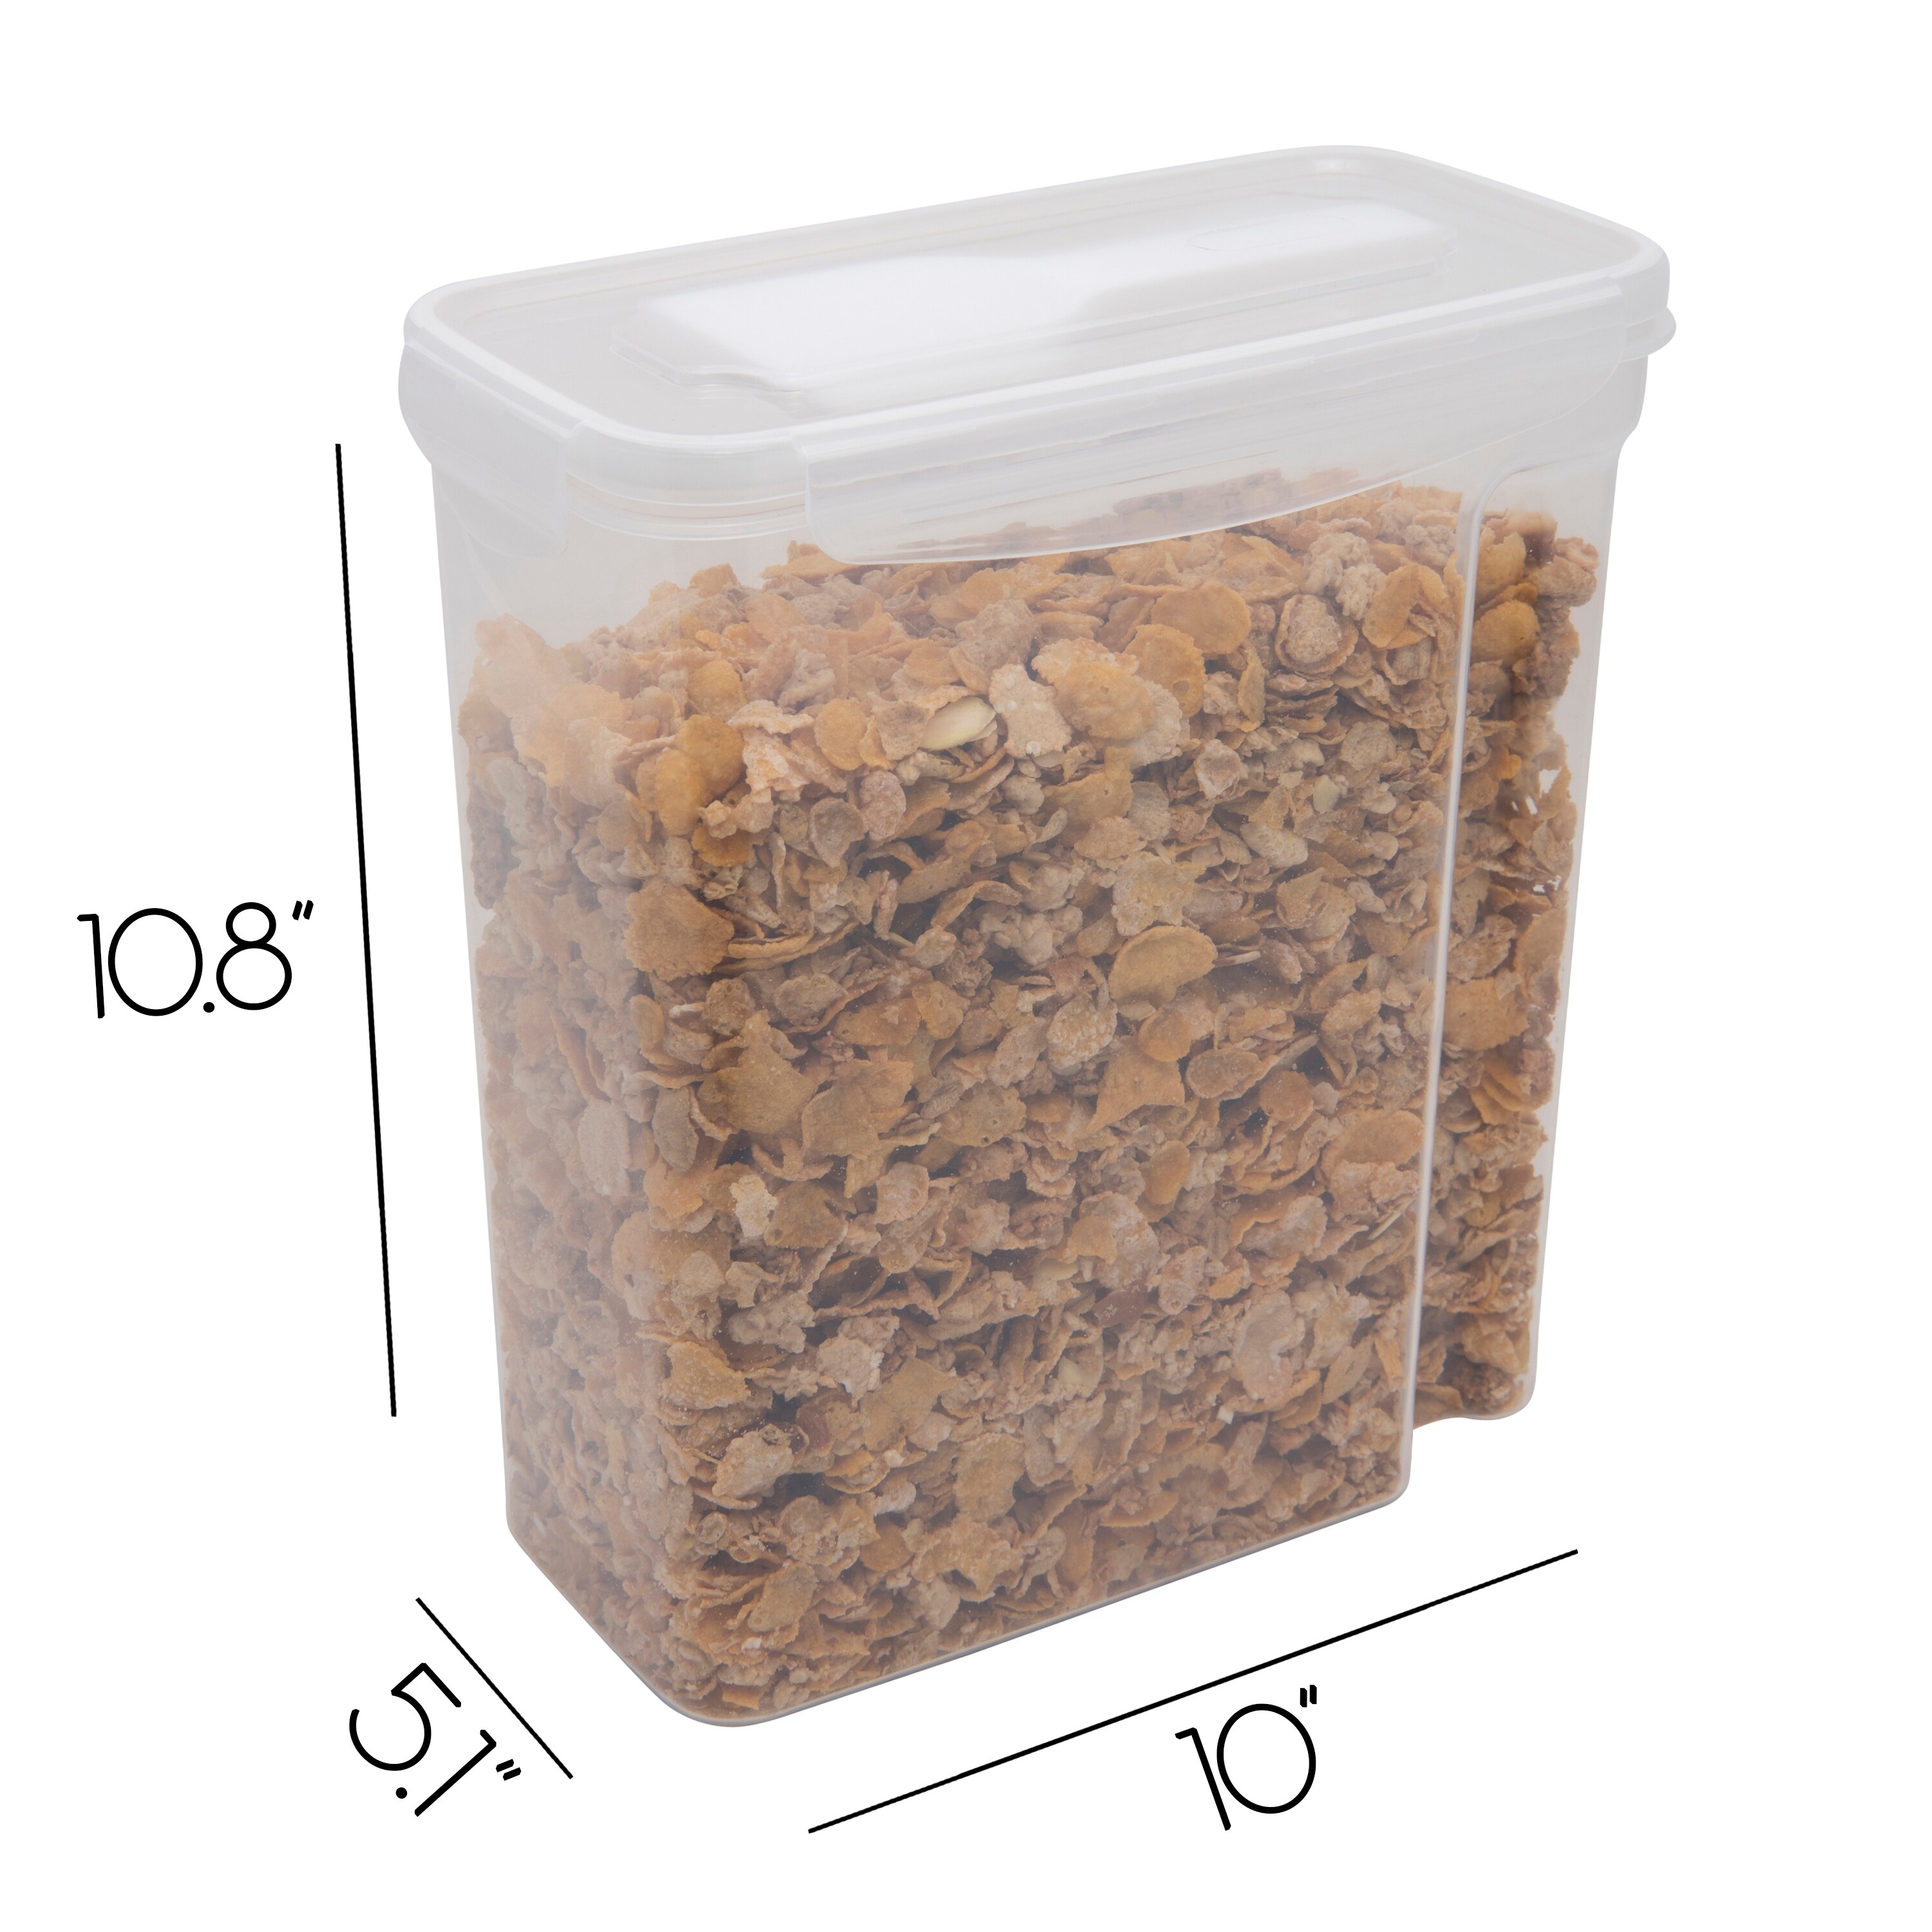 https://ak1.ostkcdn.com/images/products/is/images/direct/b3ffb0c528df86dc10560def5b3339c414149a23/Kitchen-Details-Large-Size-Airtight-Cereal-Container-with-Scooper.jpg